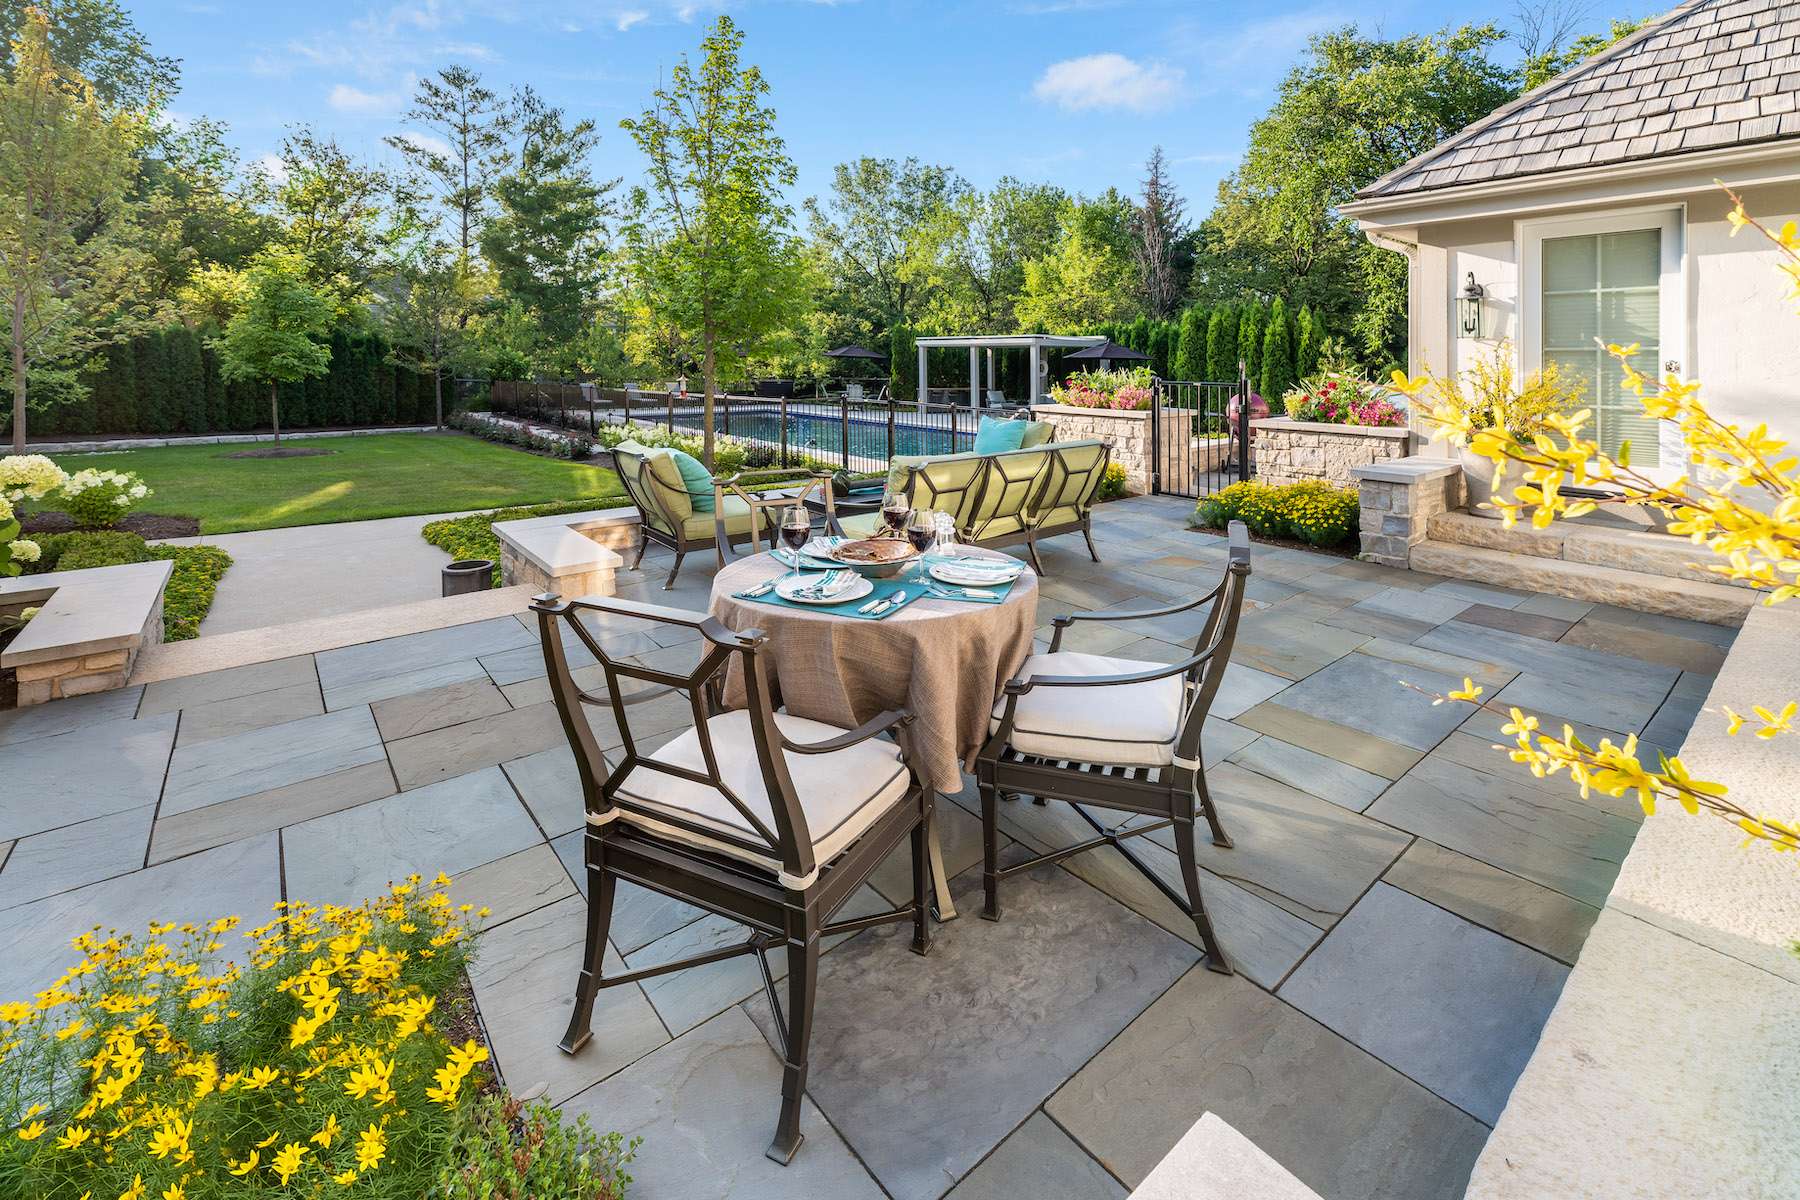 How Much Does it Cost to Install a Bluestone Patio in Greater Chicago?